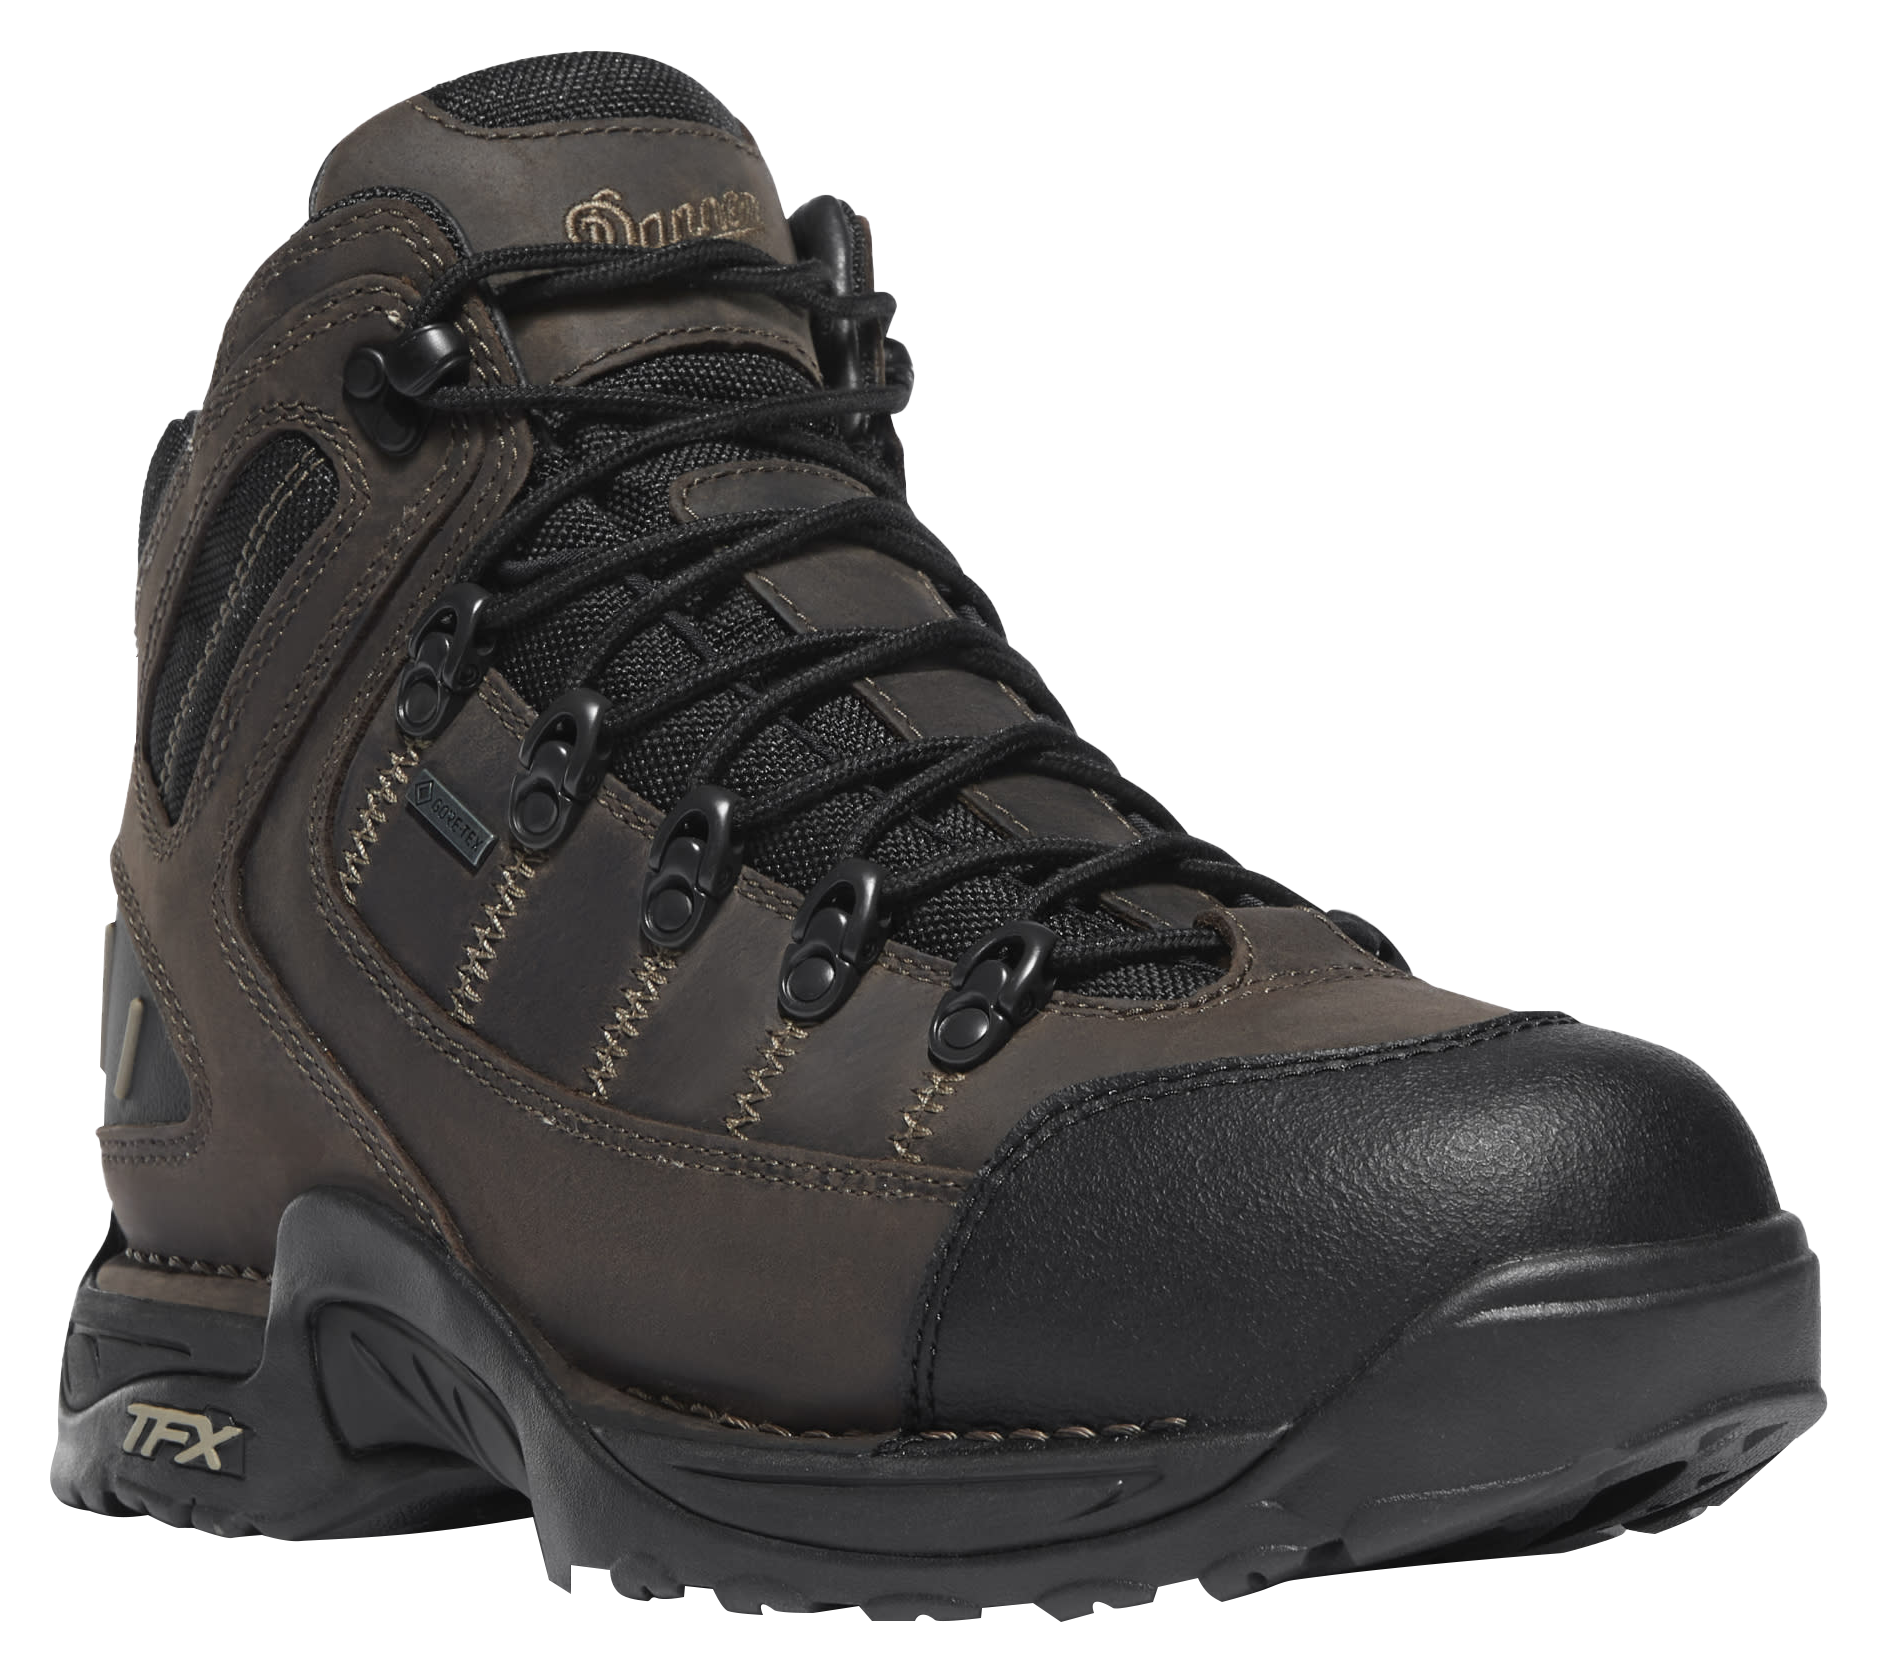 Danner 453 GORE-TEX Waterproof Hiking Boots for Men - Loam Brown/Chocolate Chip - 10M